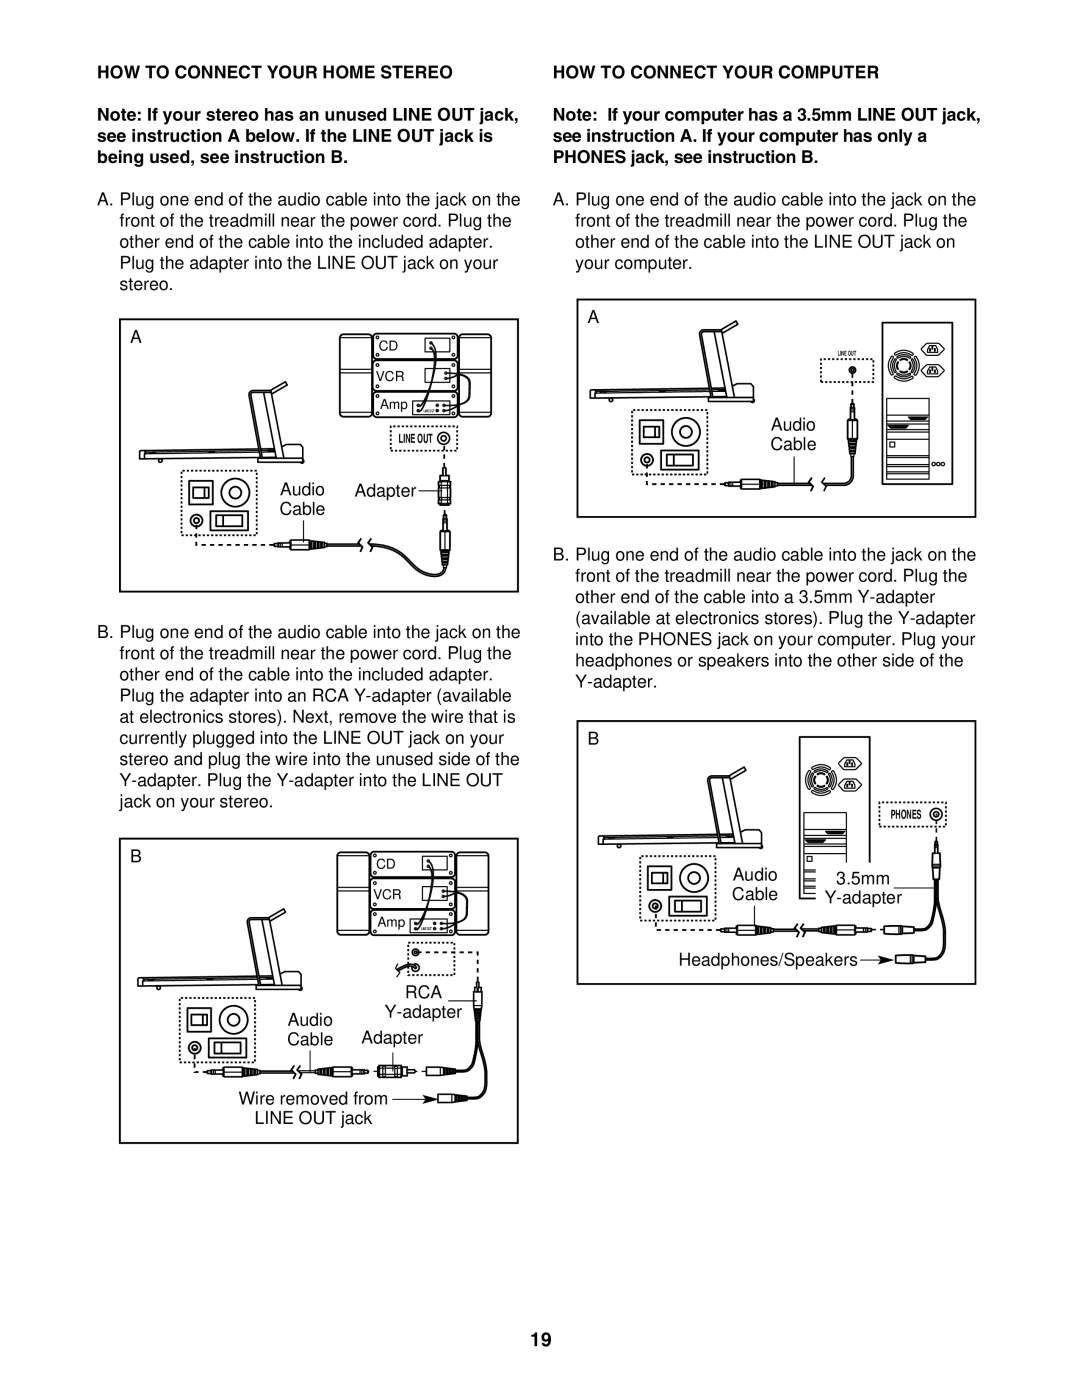 ProForm DTL52942 user manual HOW to Connect Your Home Stereo, HOW to Connect Your Computer 